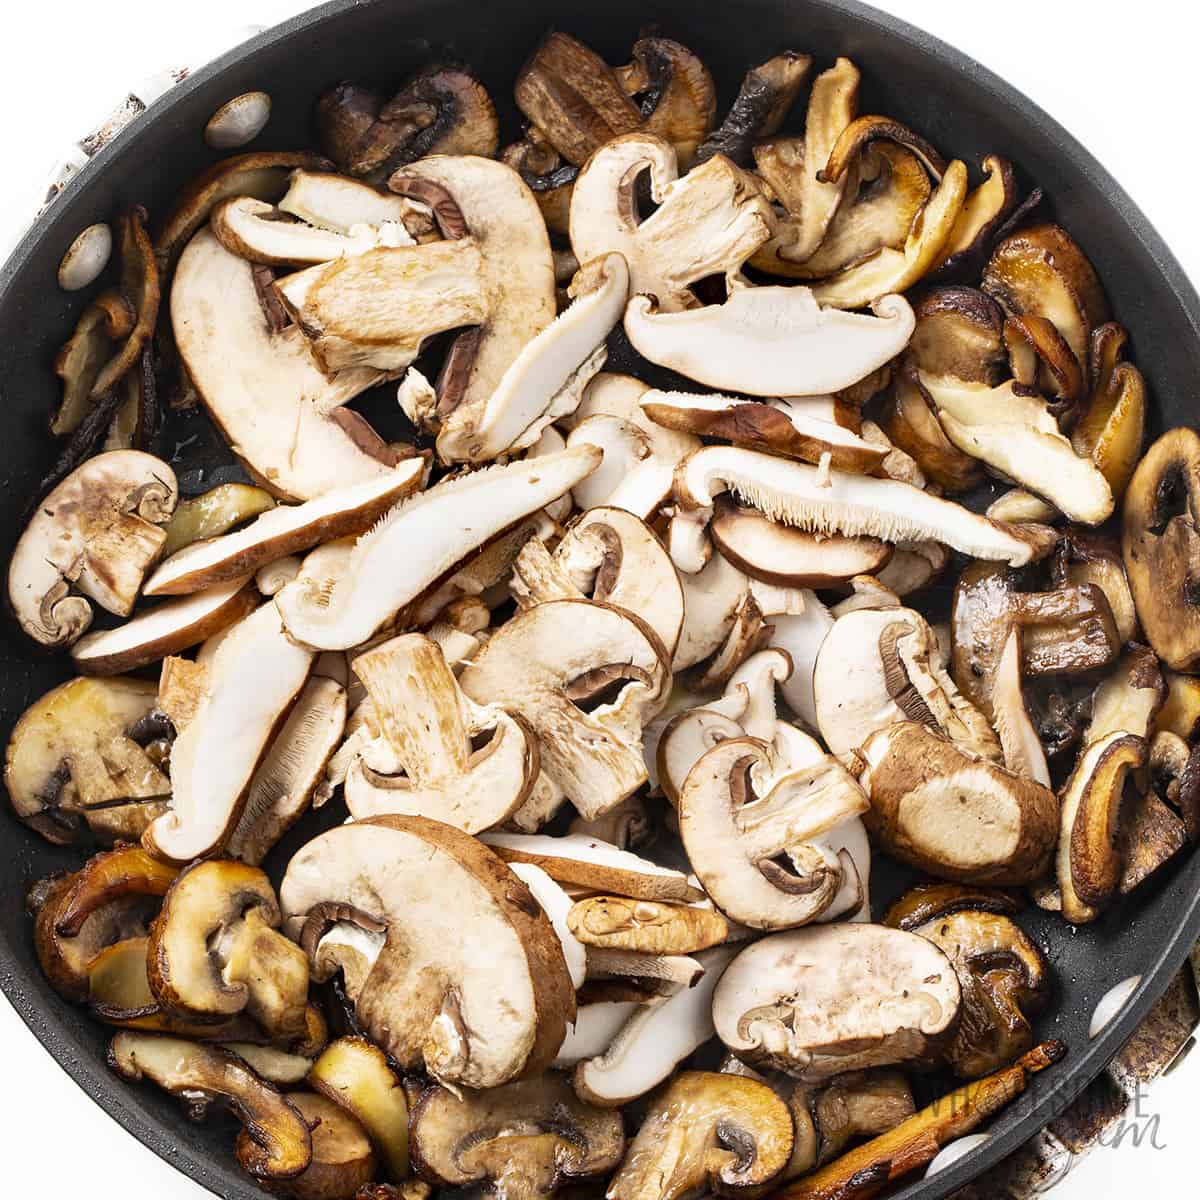 Adding second batch of mushrooms to the pan.